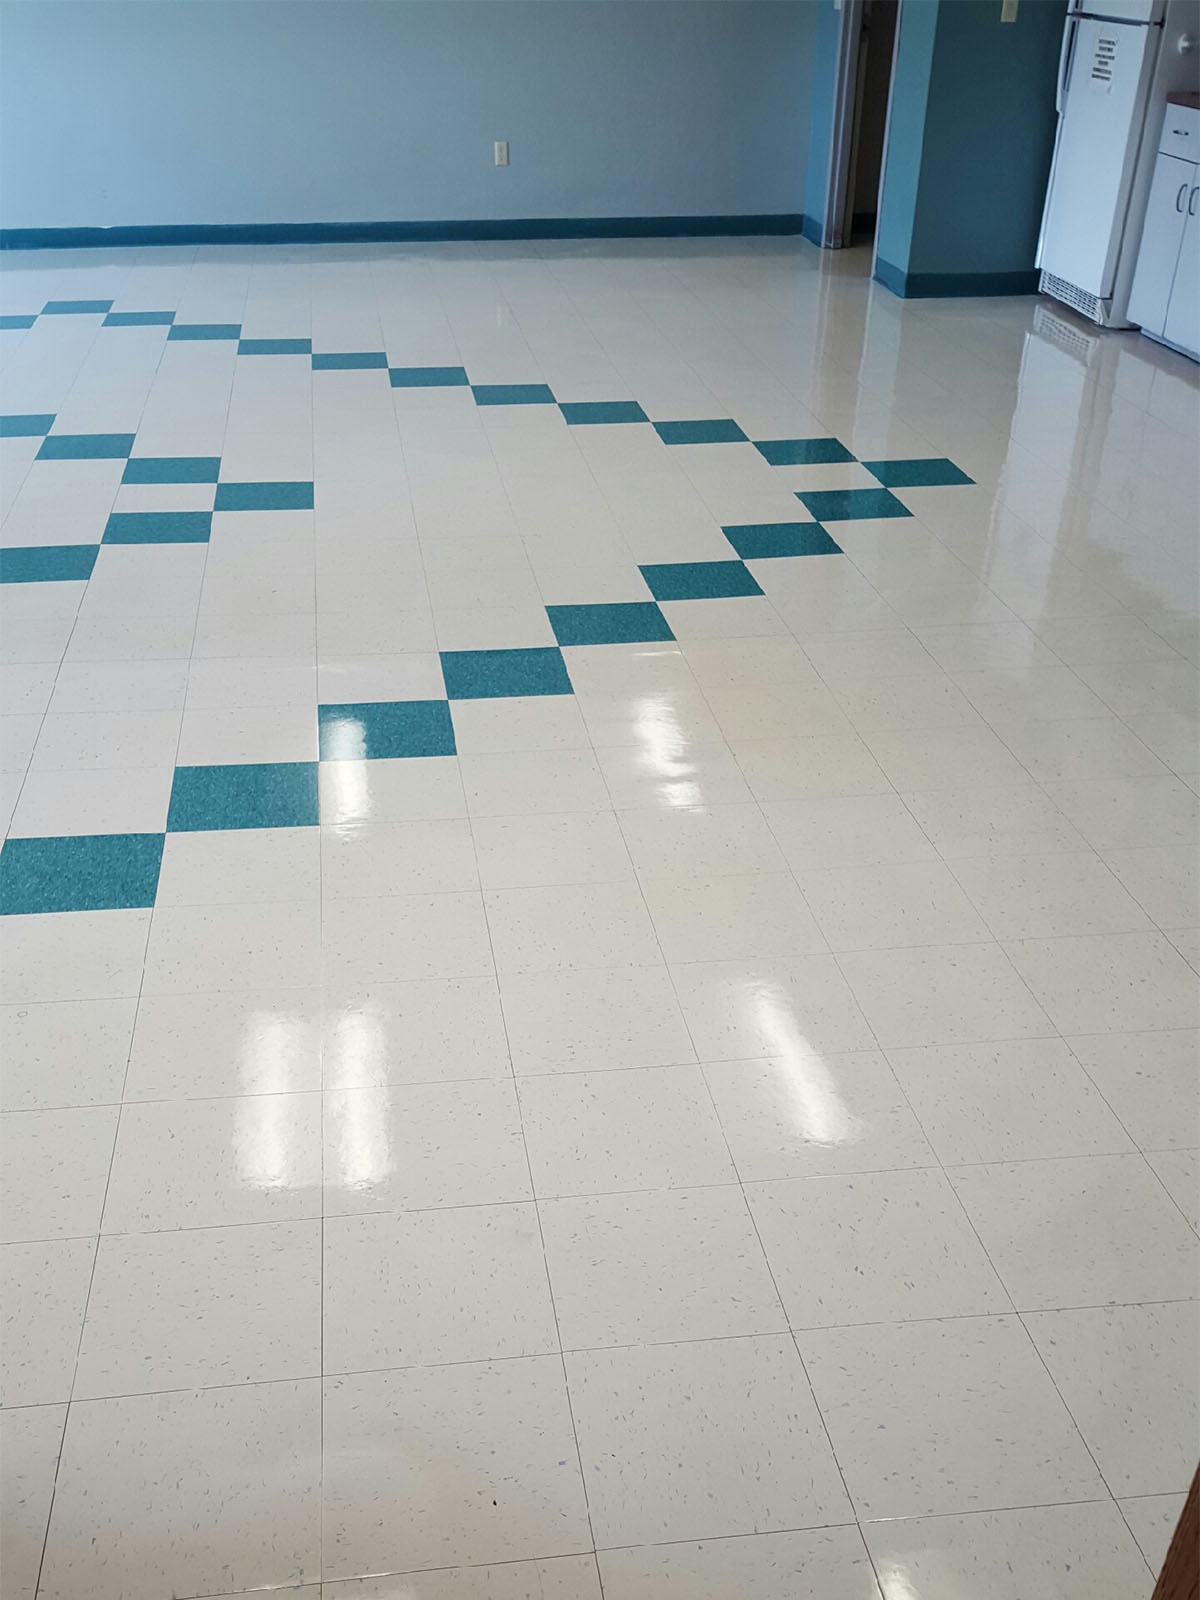 Now it looks like a brand new floor after our professional tile cleaning services.